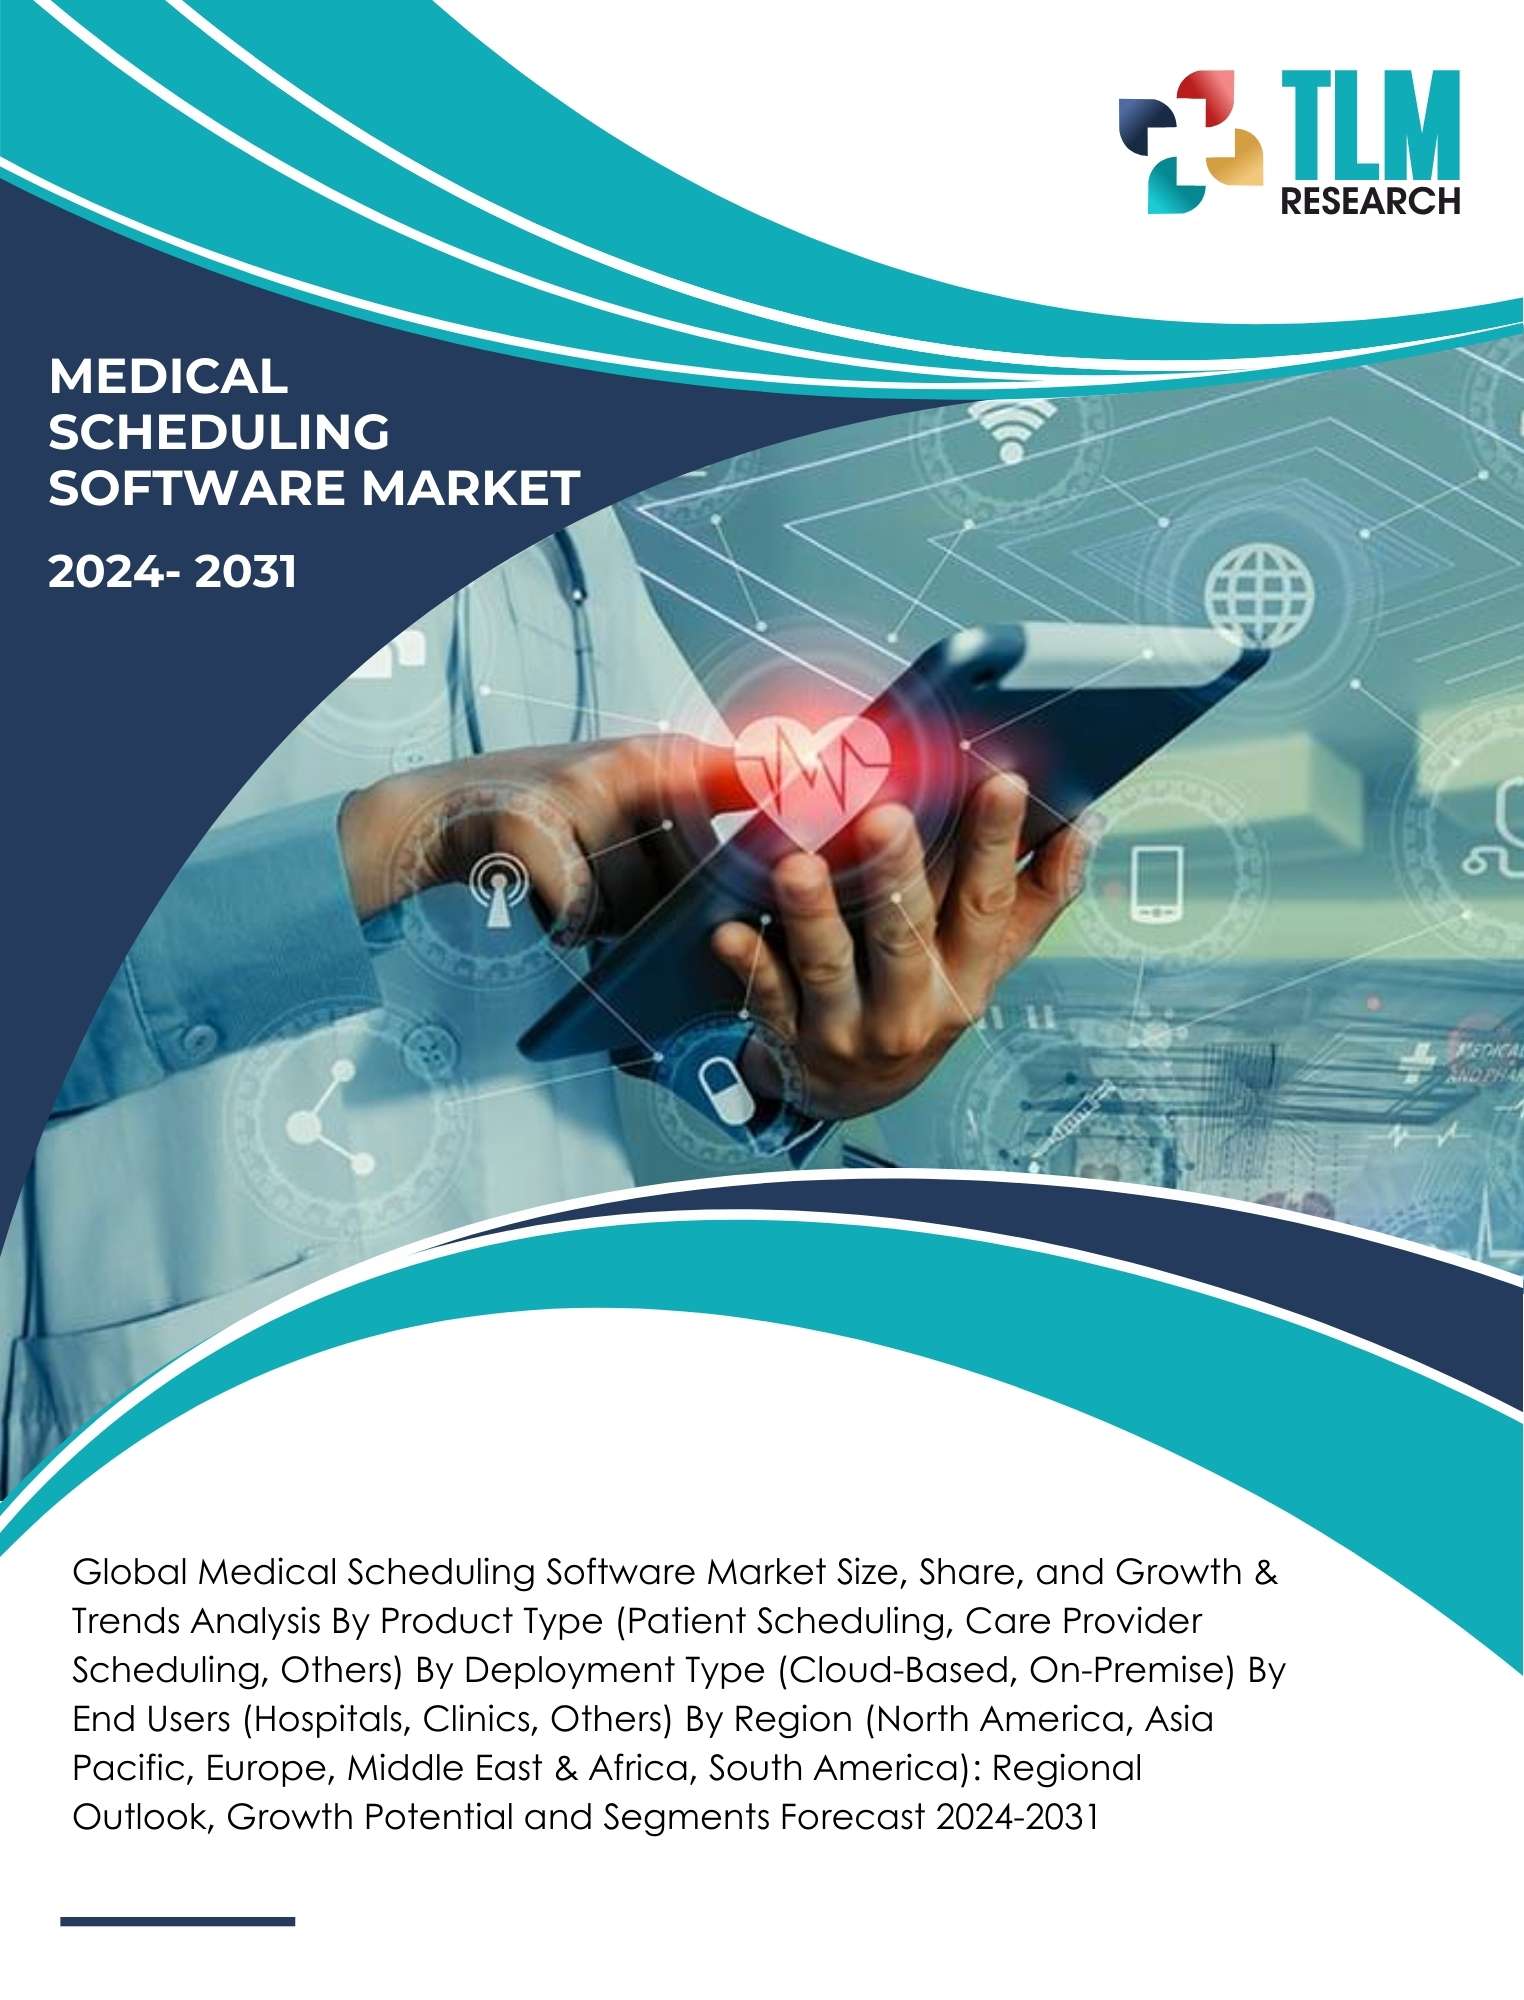 Medical Scheduling Software Market Demand & Forecast By 2031 | TLM Research